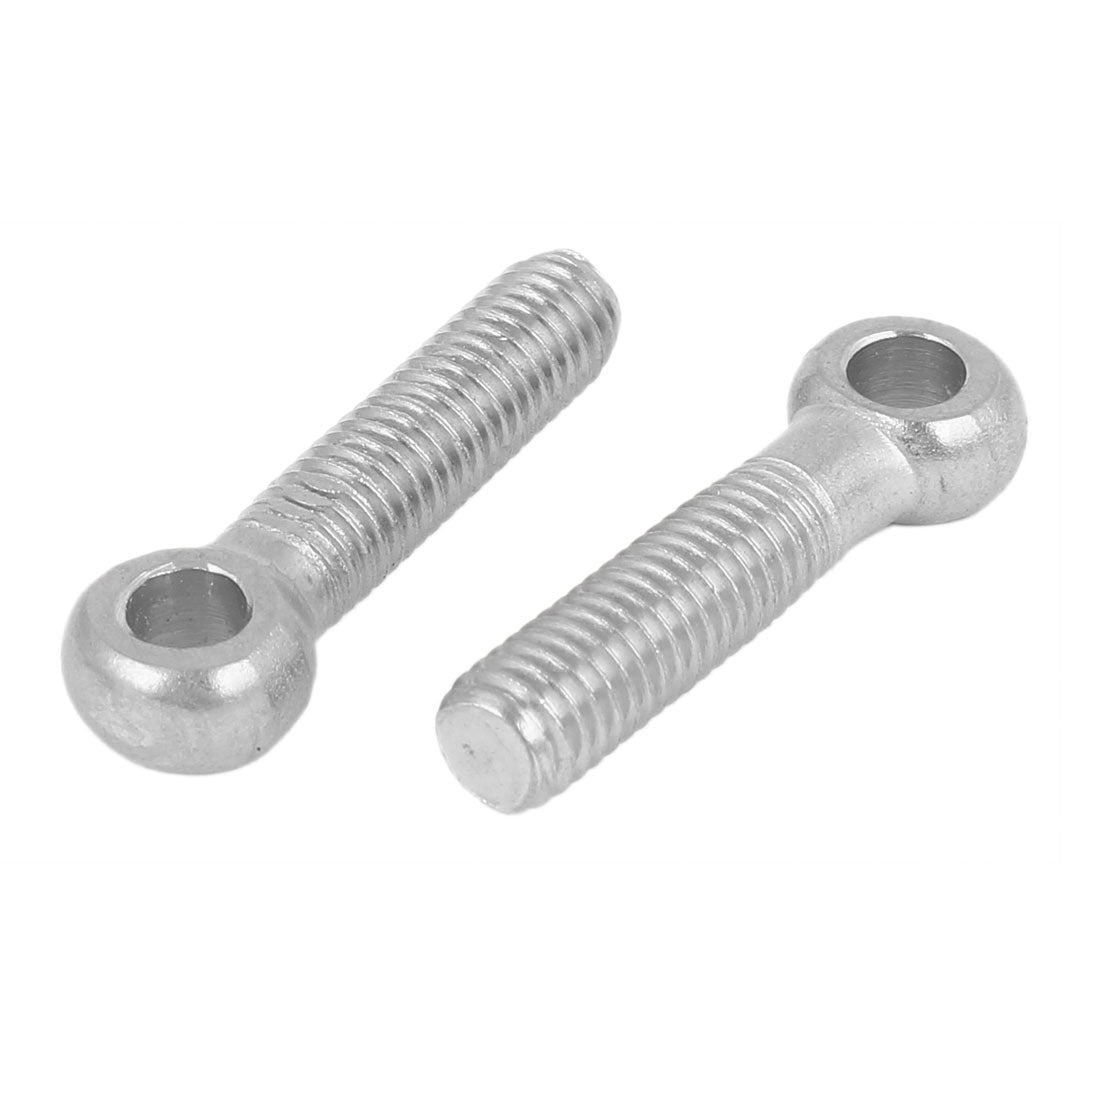 uxcell Uxcell 8mm x 35mm 304 Stainless Steel Machinery Lifting Swing Eye Bolt 4PCS